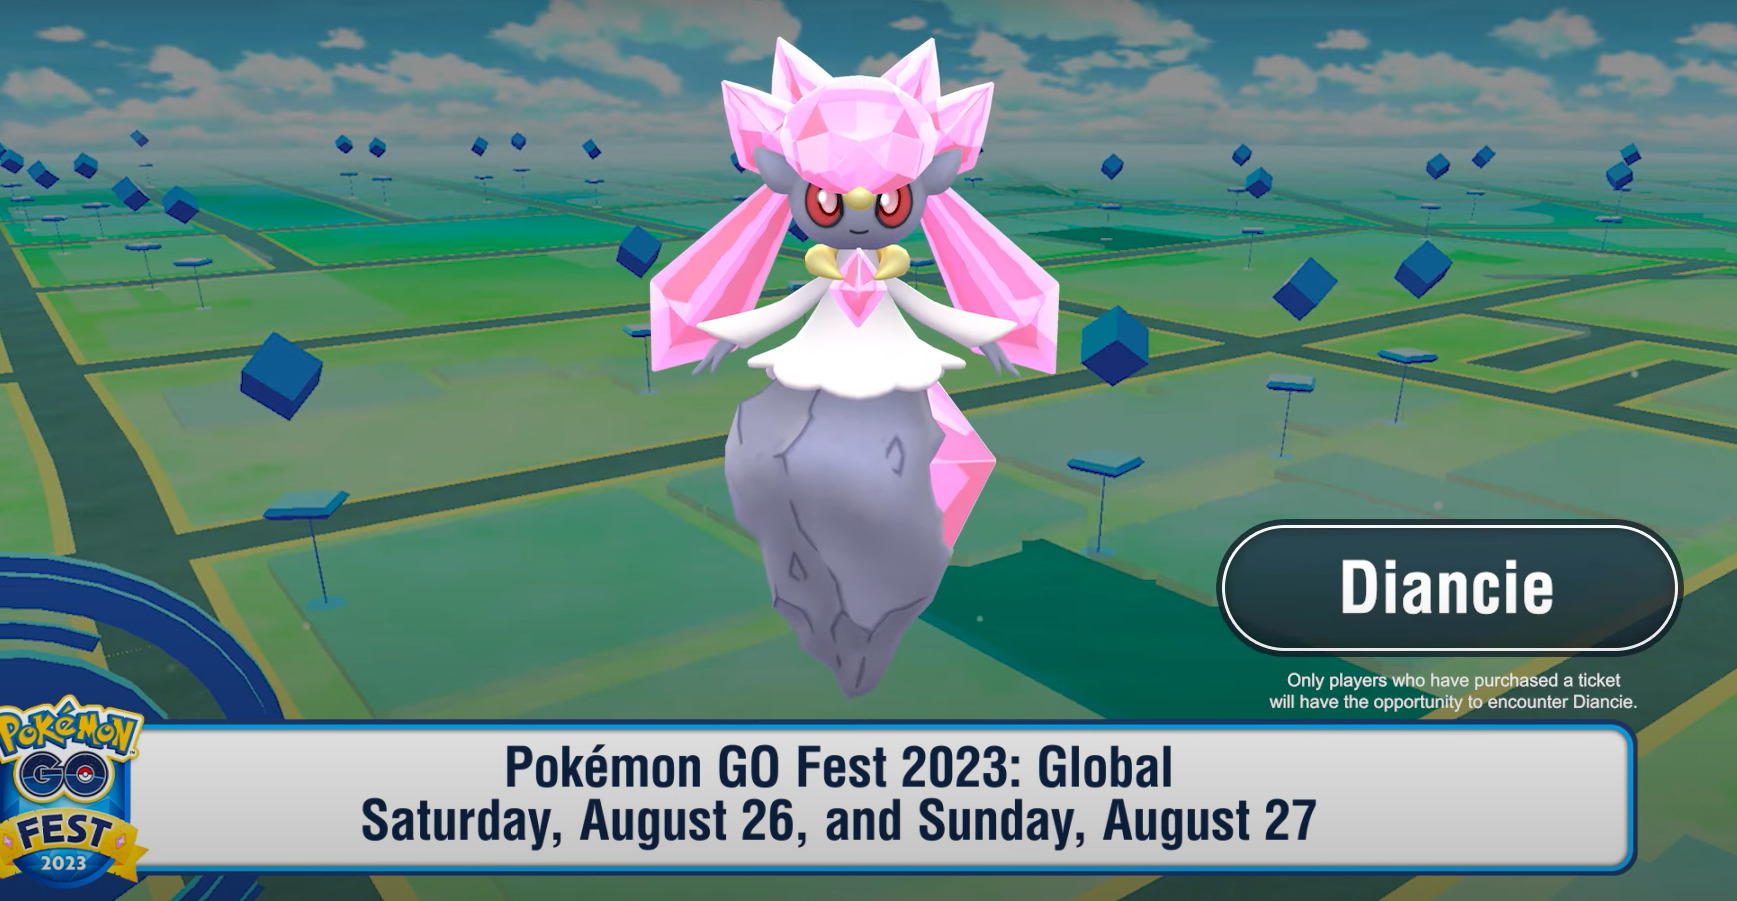 Pokémon Presents Catching all the Updates and Revealing New Experiences